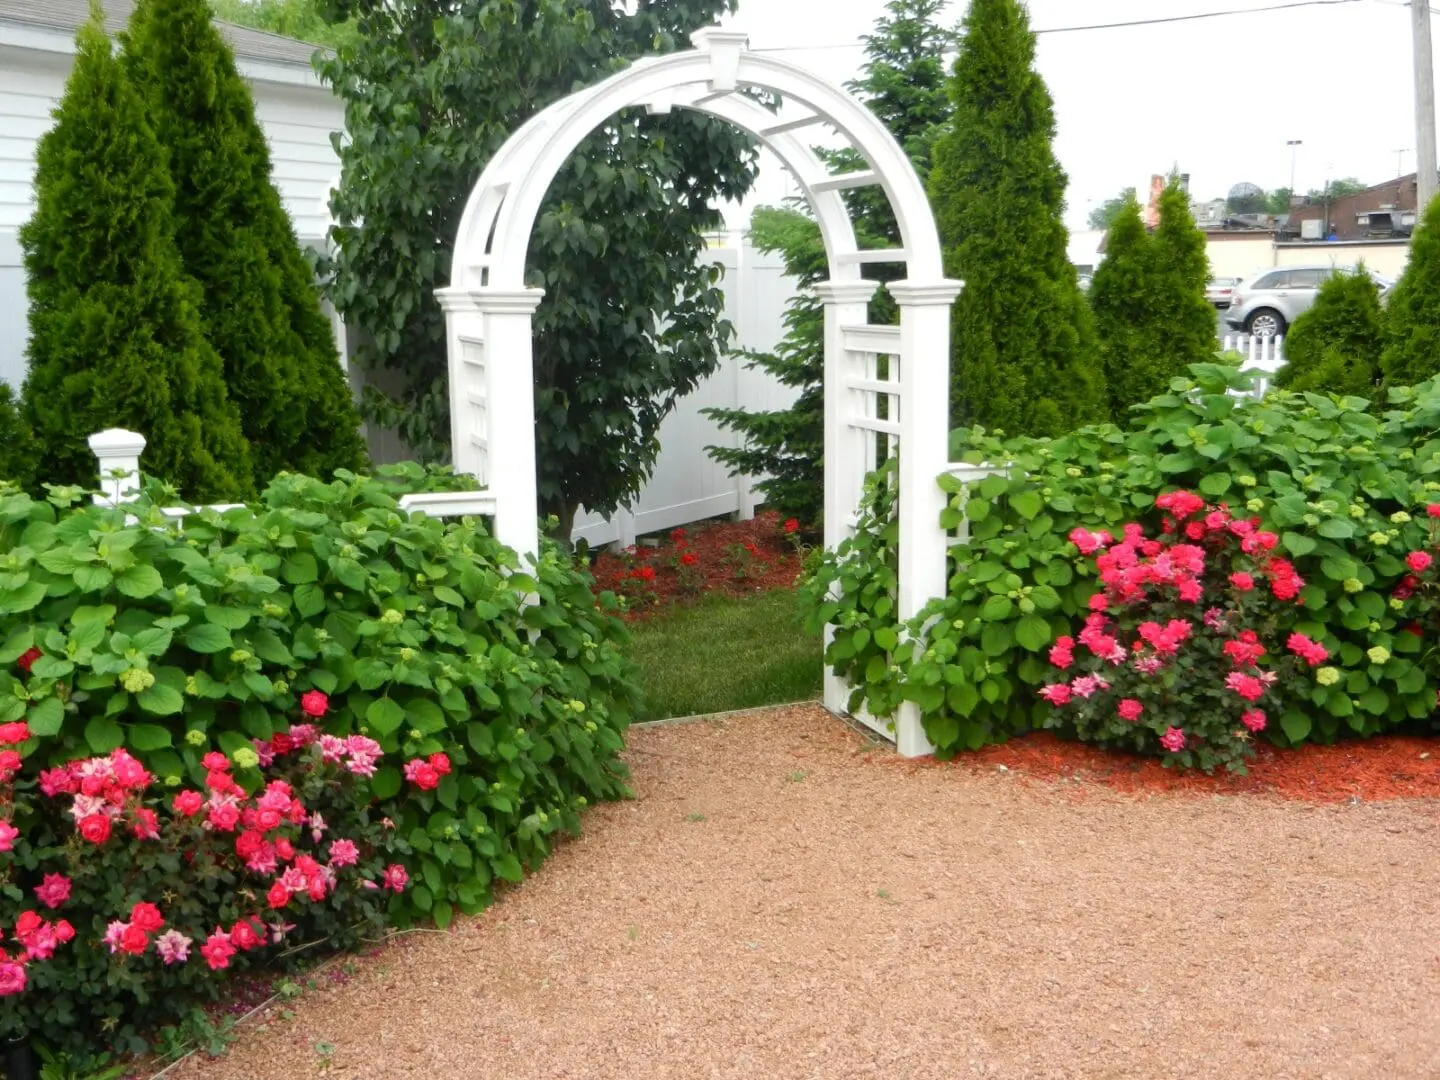 A white arbor in the middle of a garden.